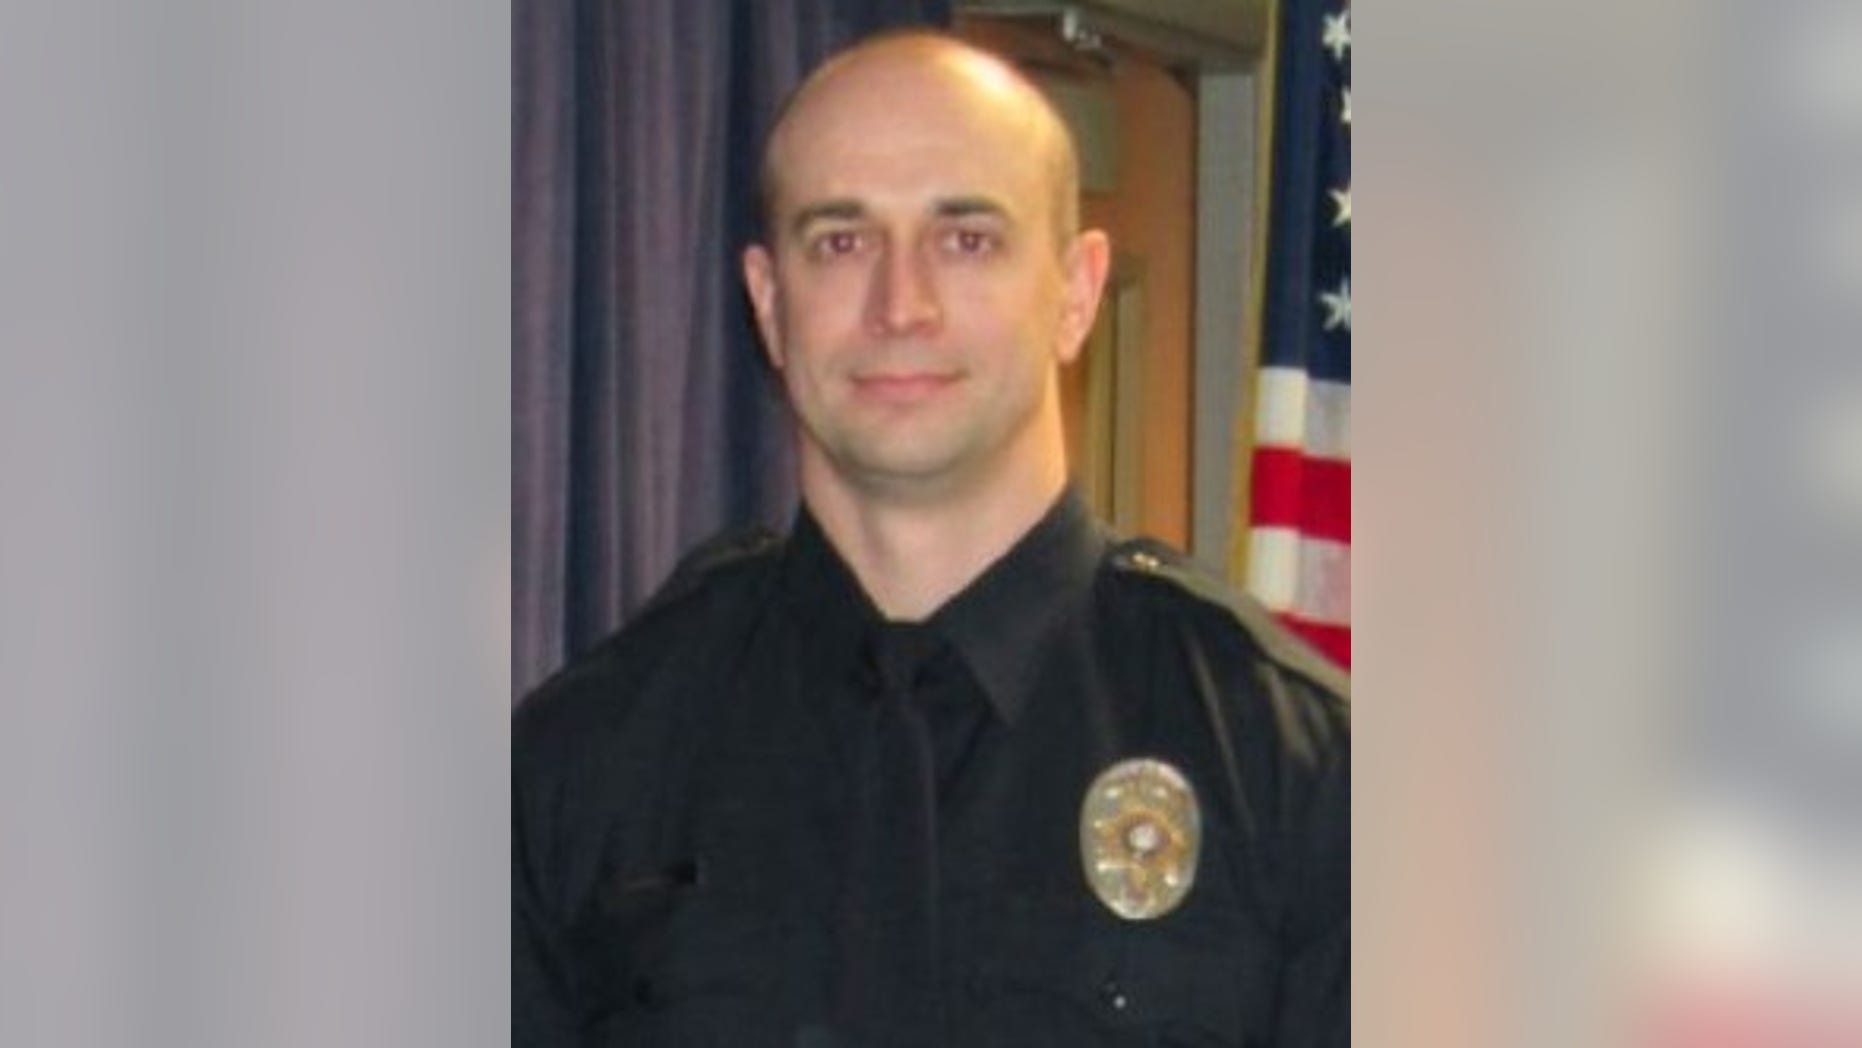 South Salt Lake Police Officer, 31 year old David Romrell, was fatally and intentionally struck by a vehicle while he was answering a burglary call in Utah on Saturday night. have announced officials.